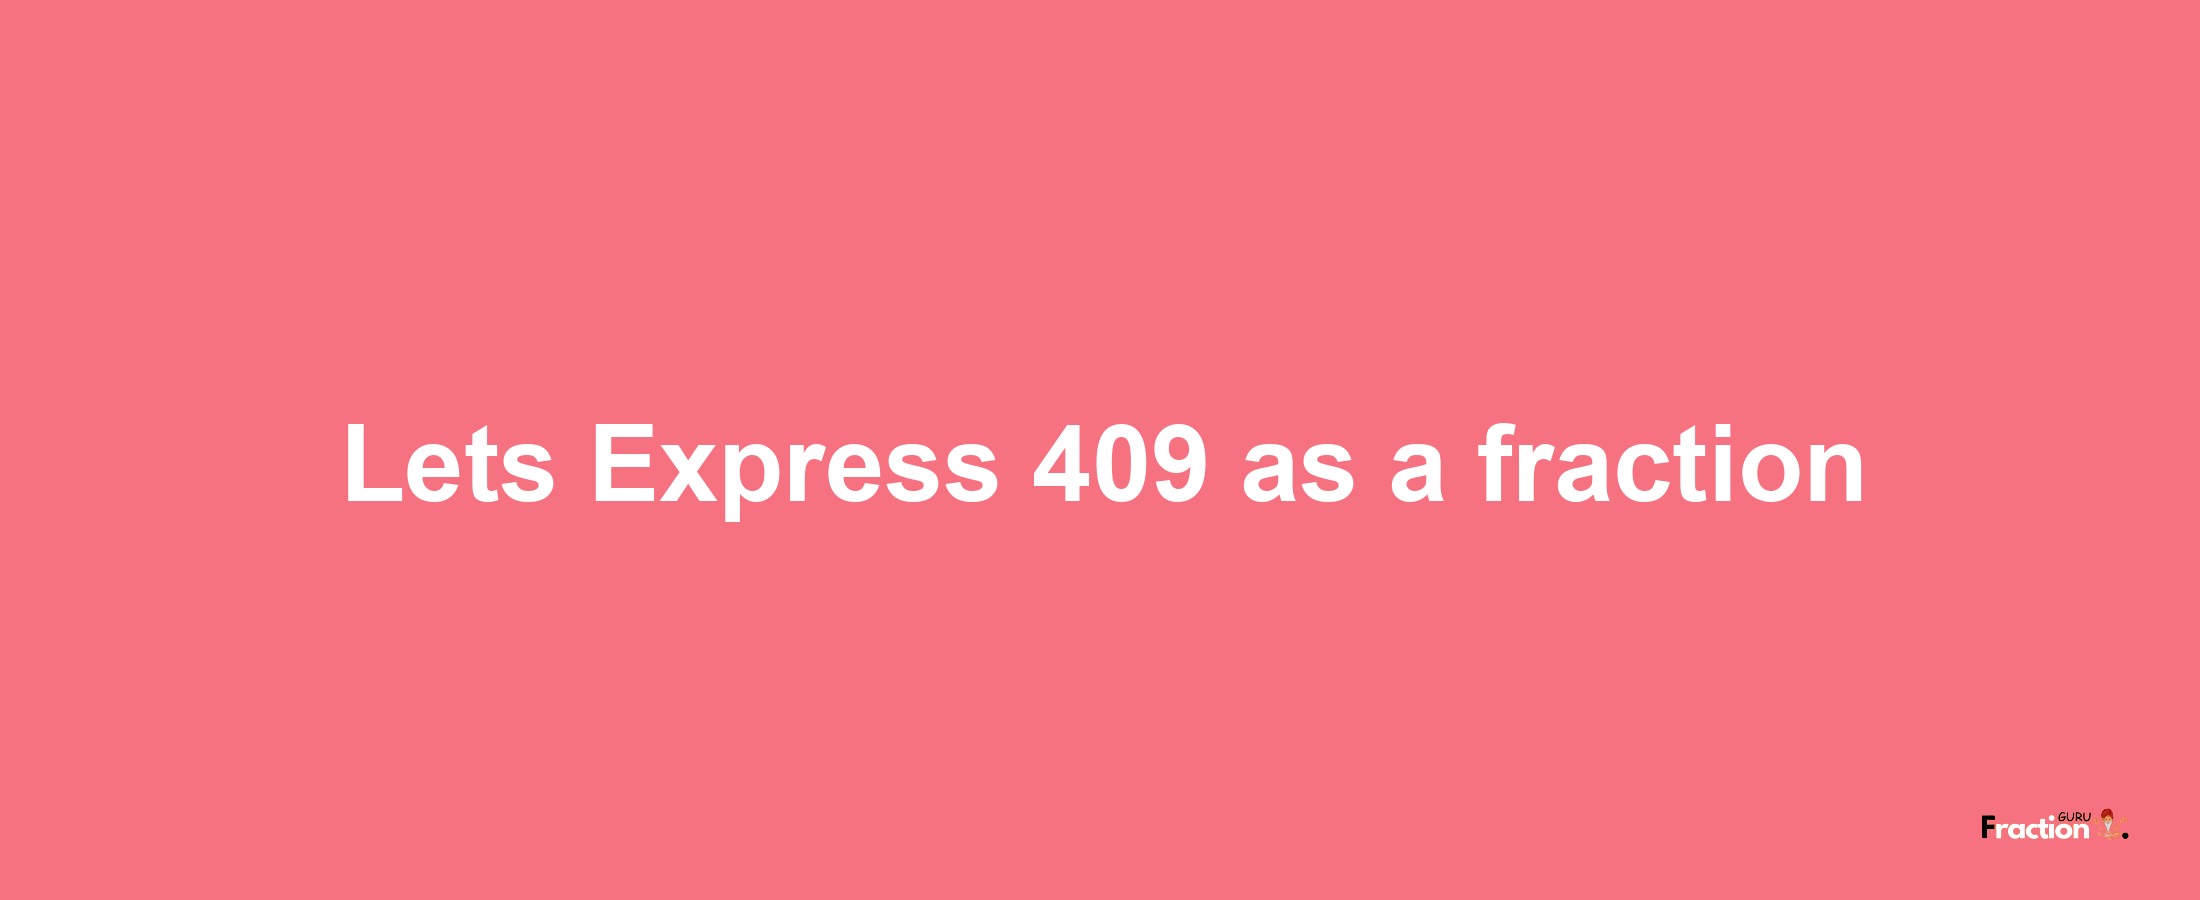 Lets Express 409 as afraction